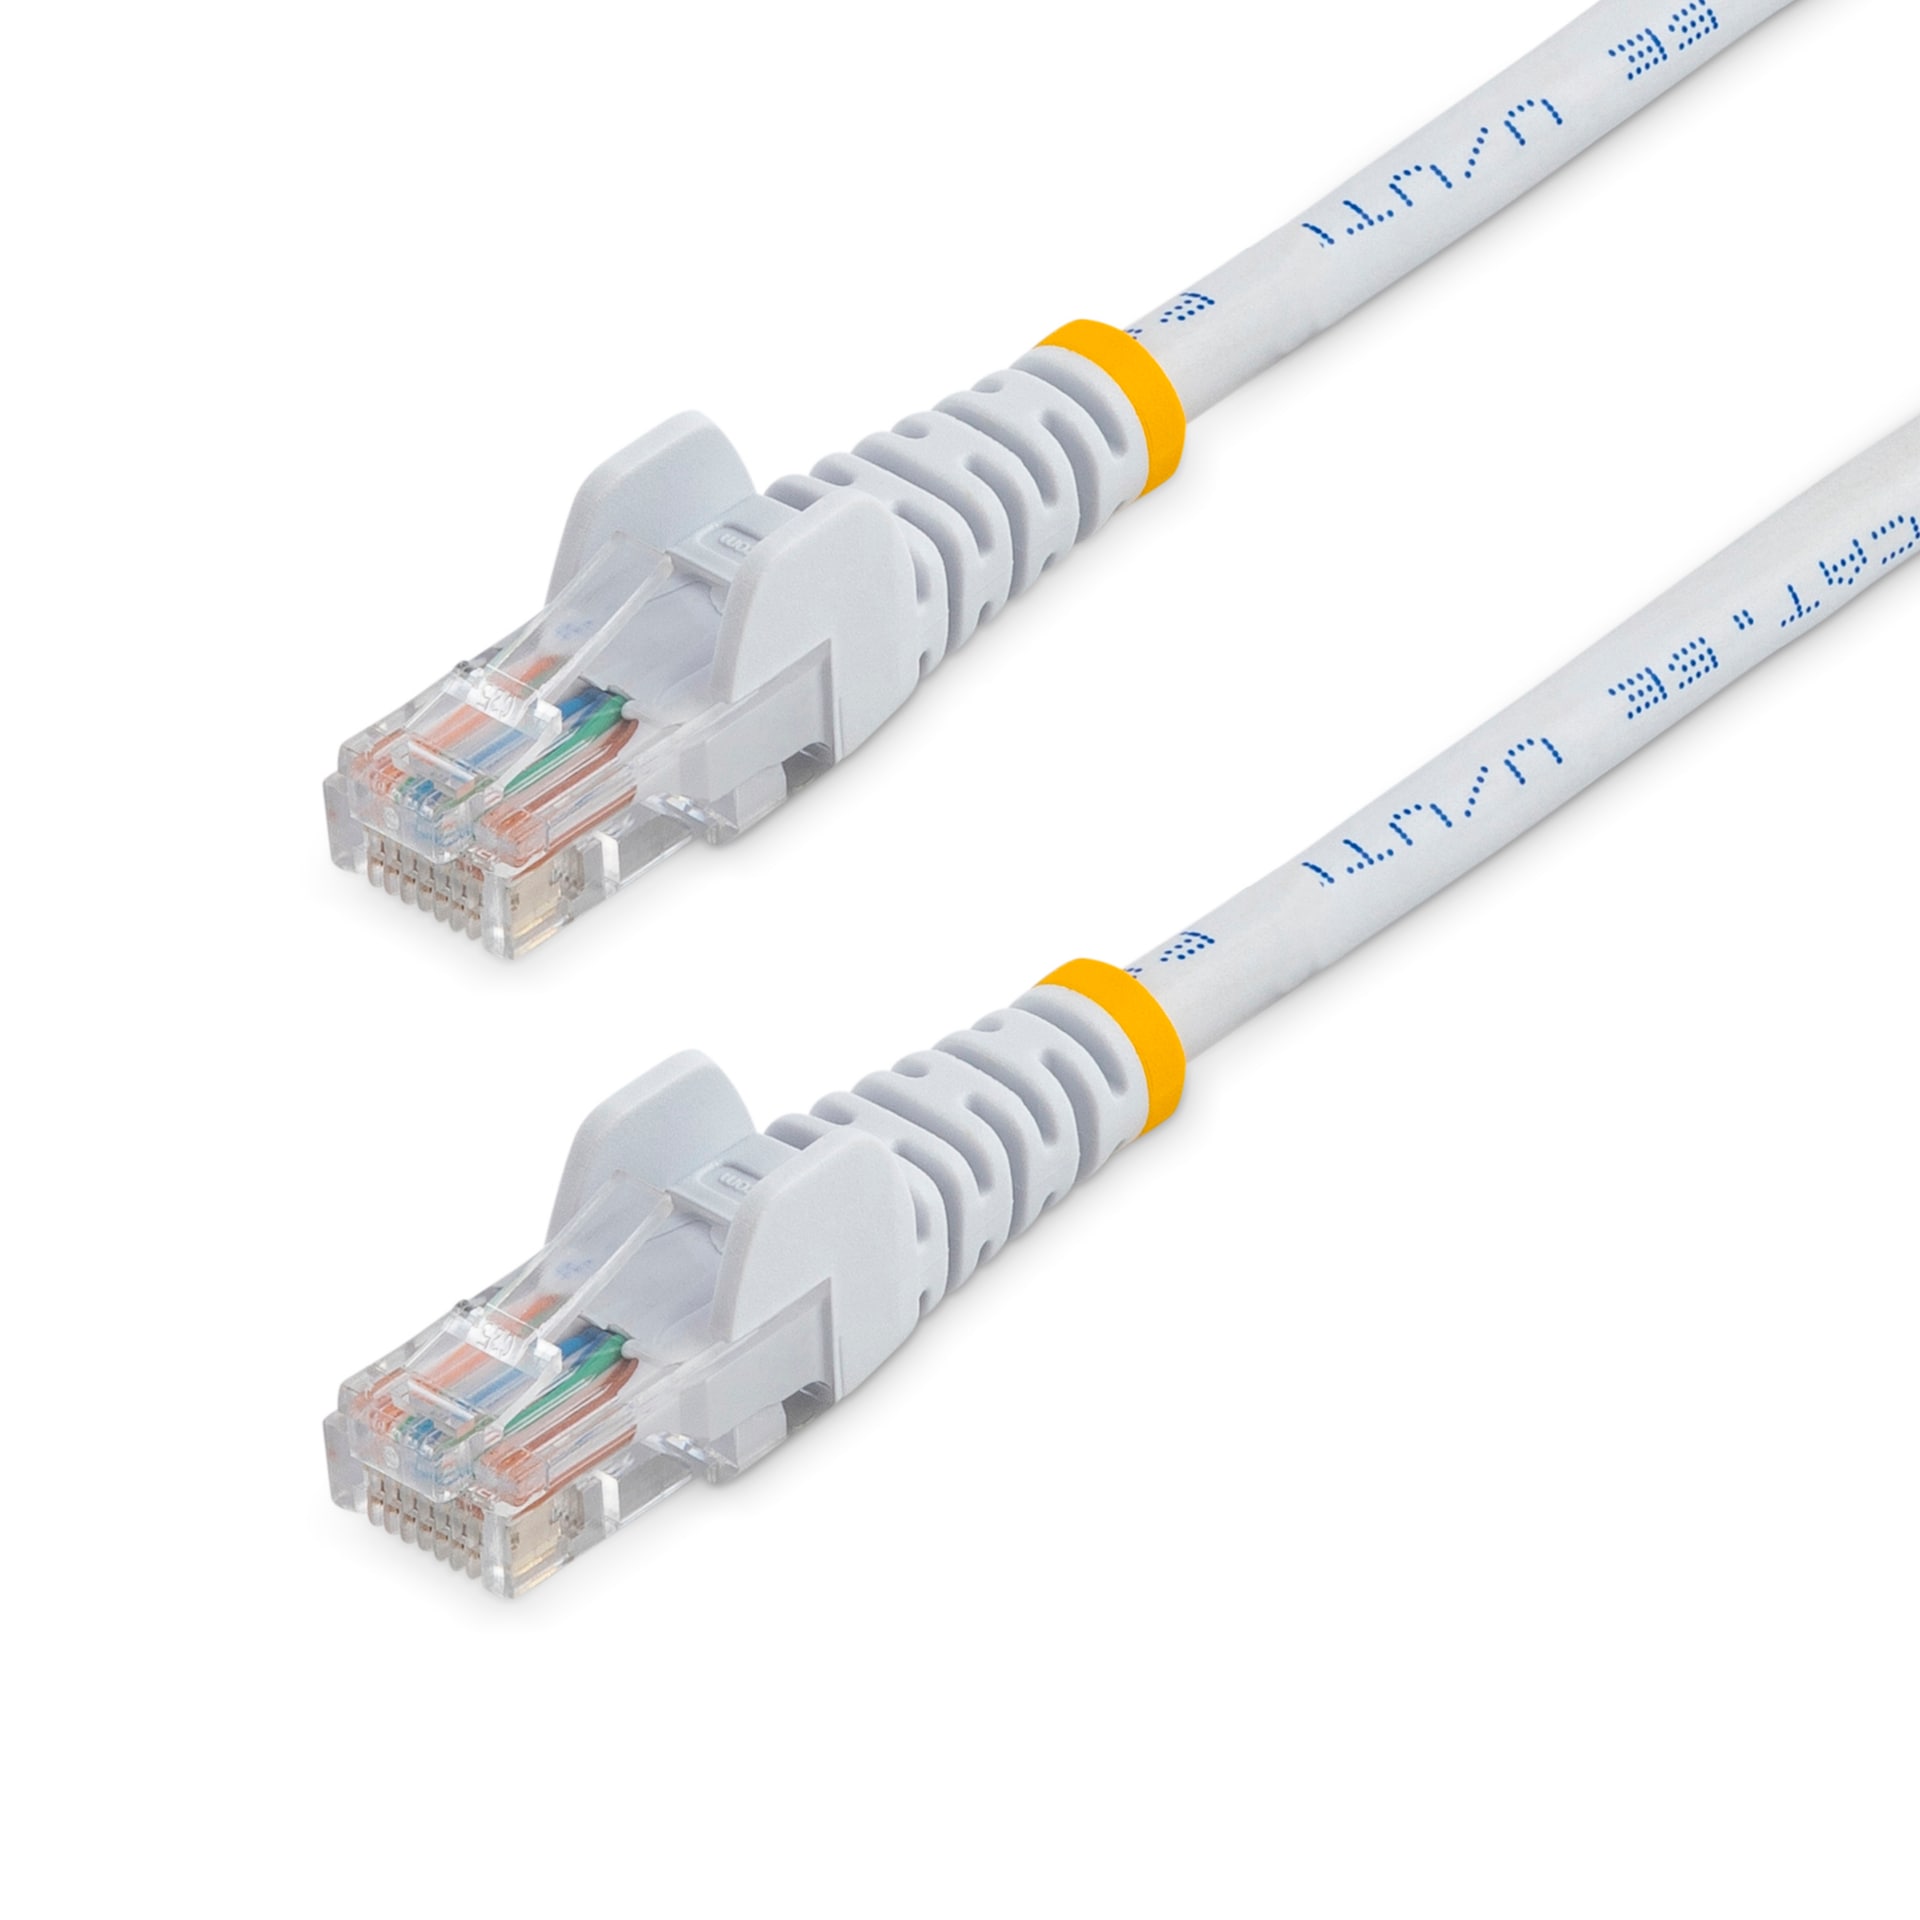 StarTech.com Cat5e Ethernet Cable 6 ft White - Cat 5e Snagless Patch Cable